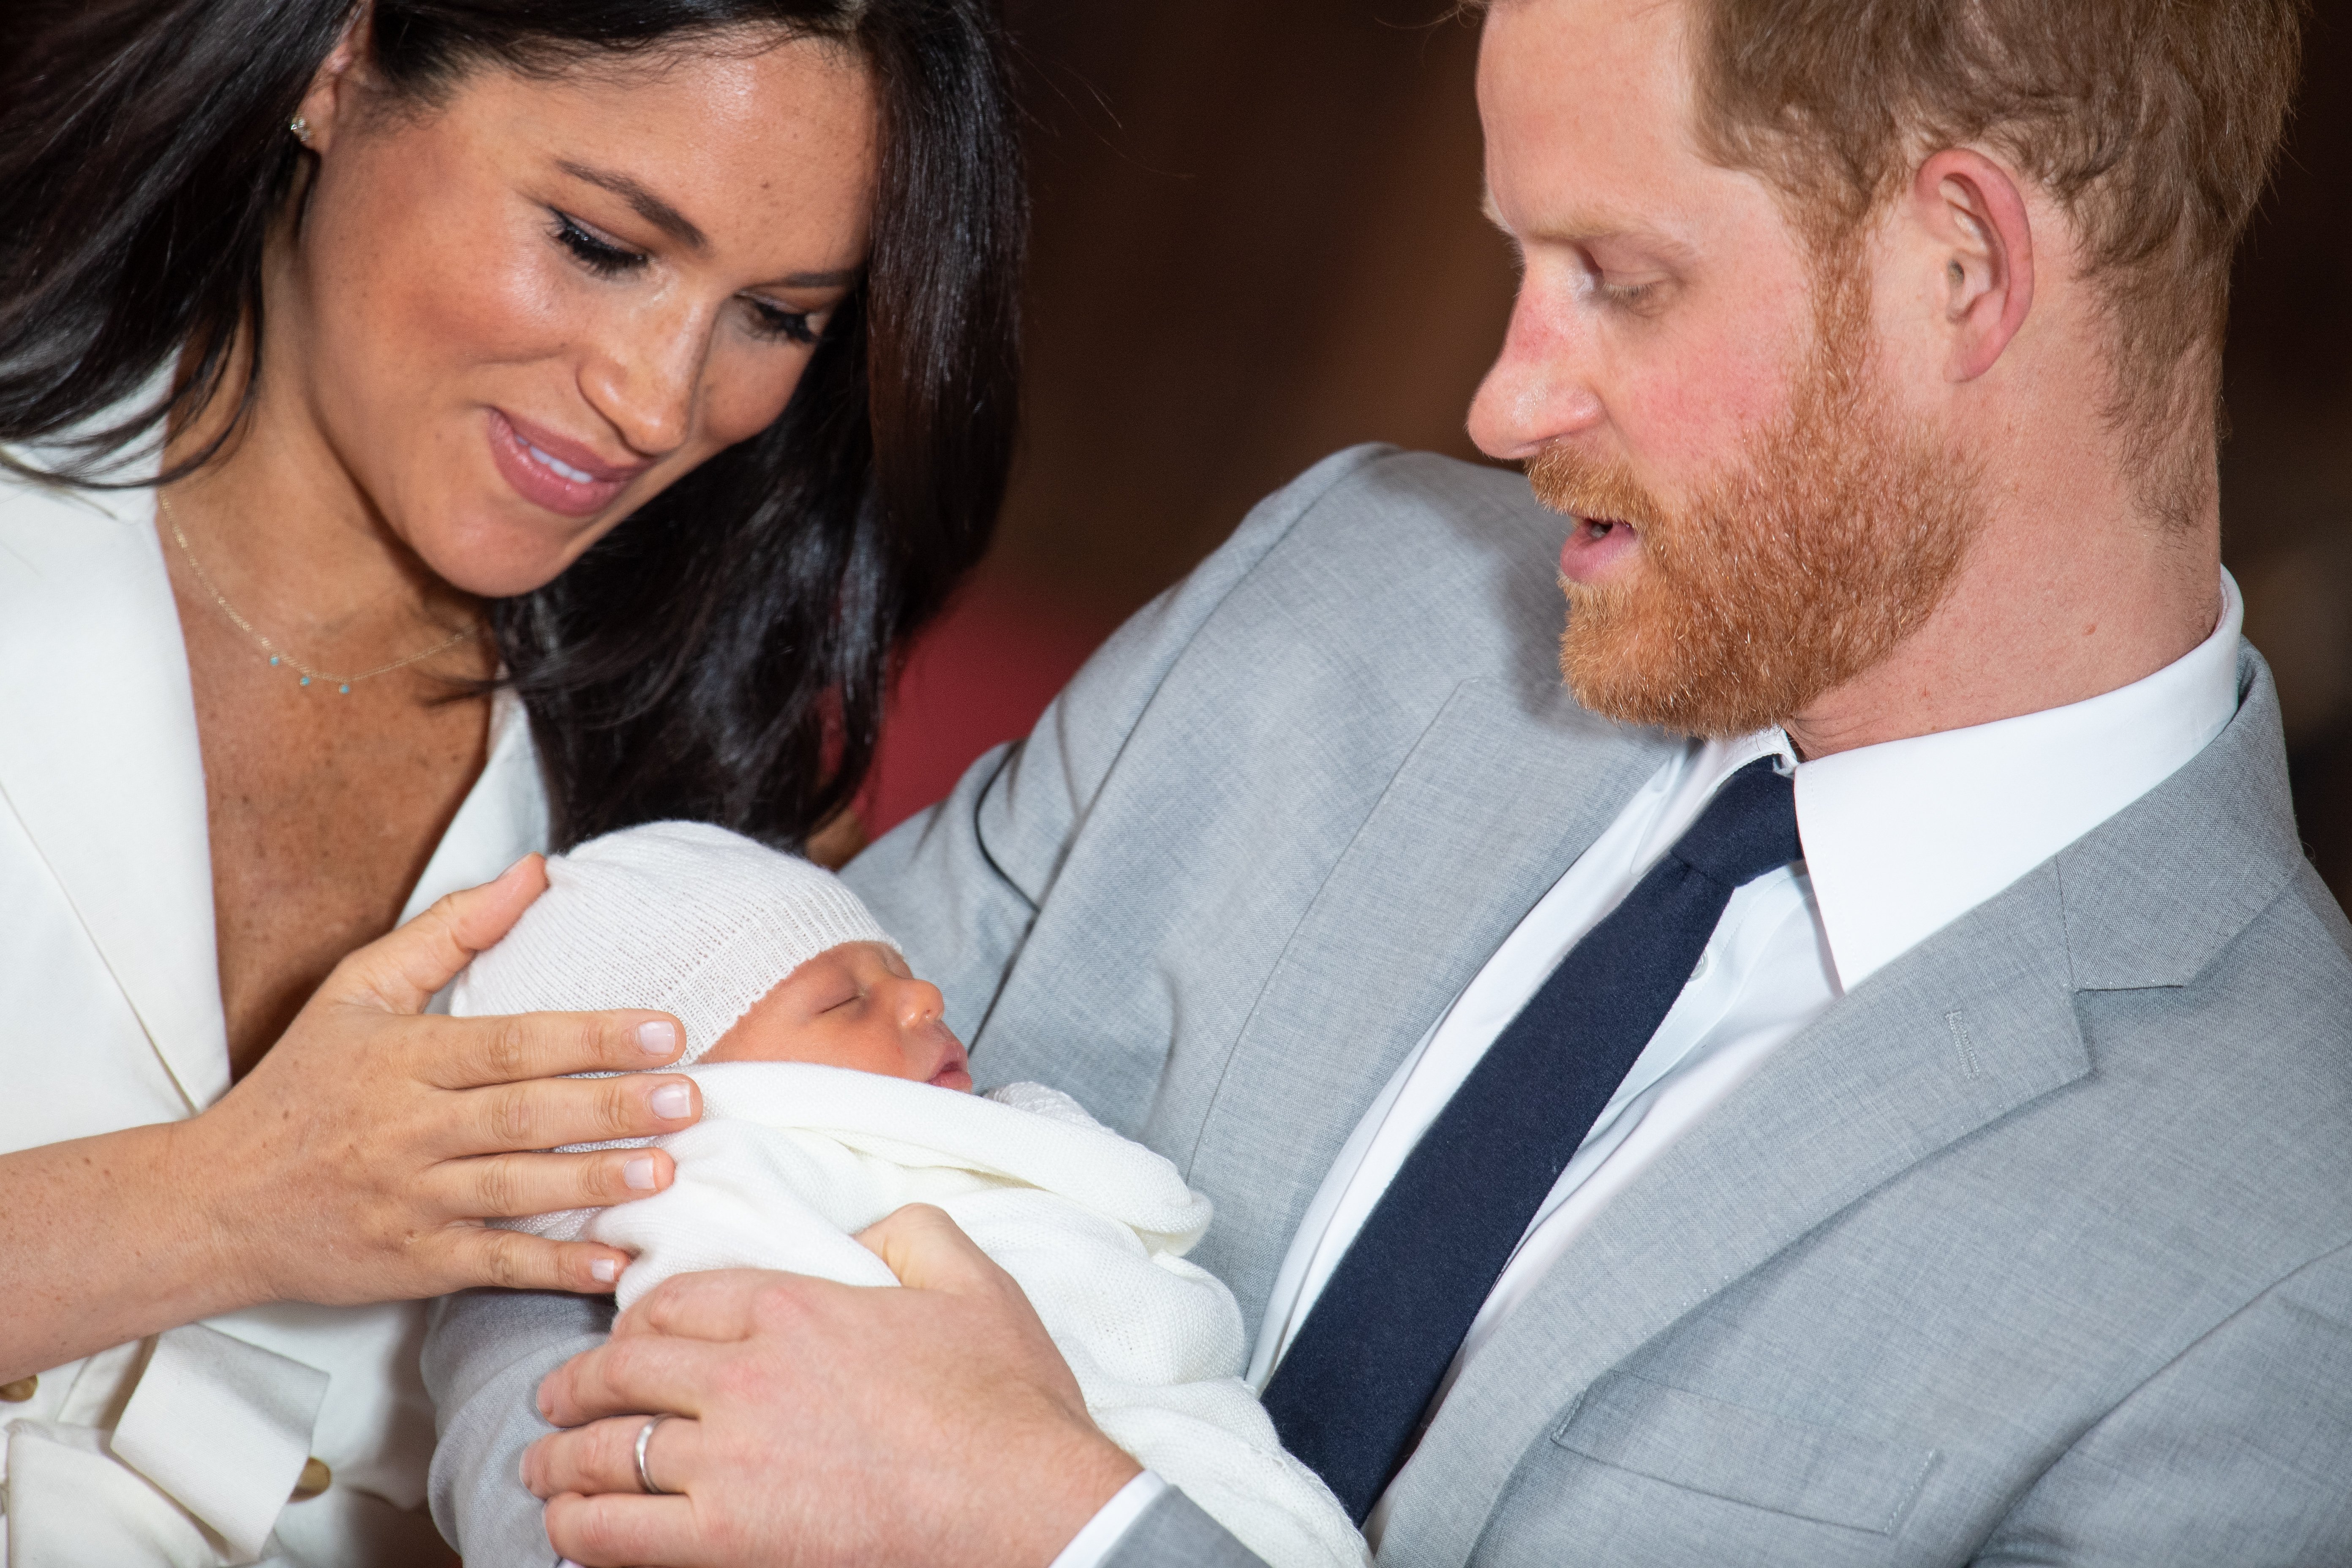 Prince Harry and Meghan Markle introduce baby Archie to the world | Photo: Getty Images